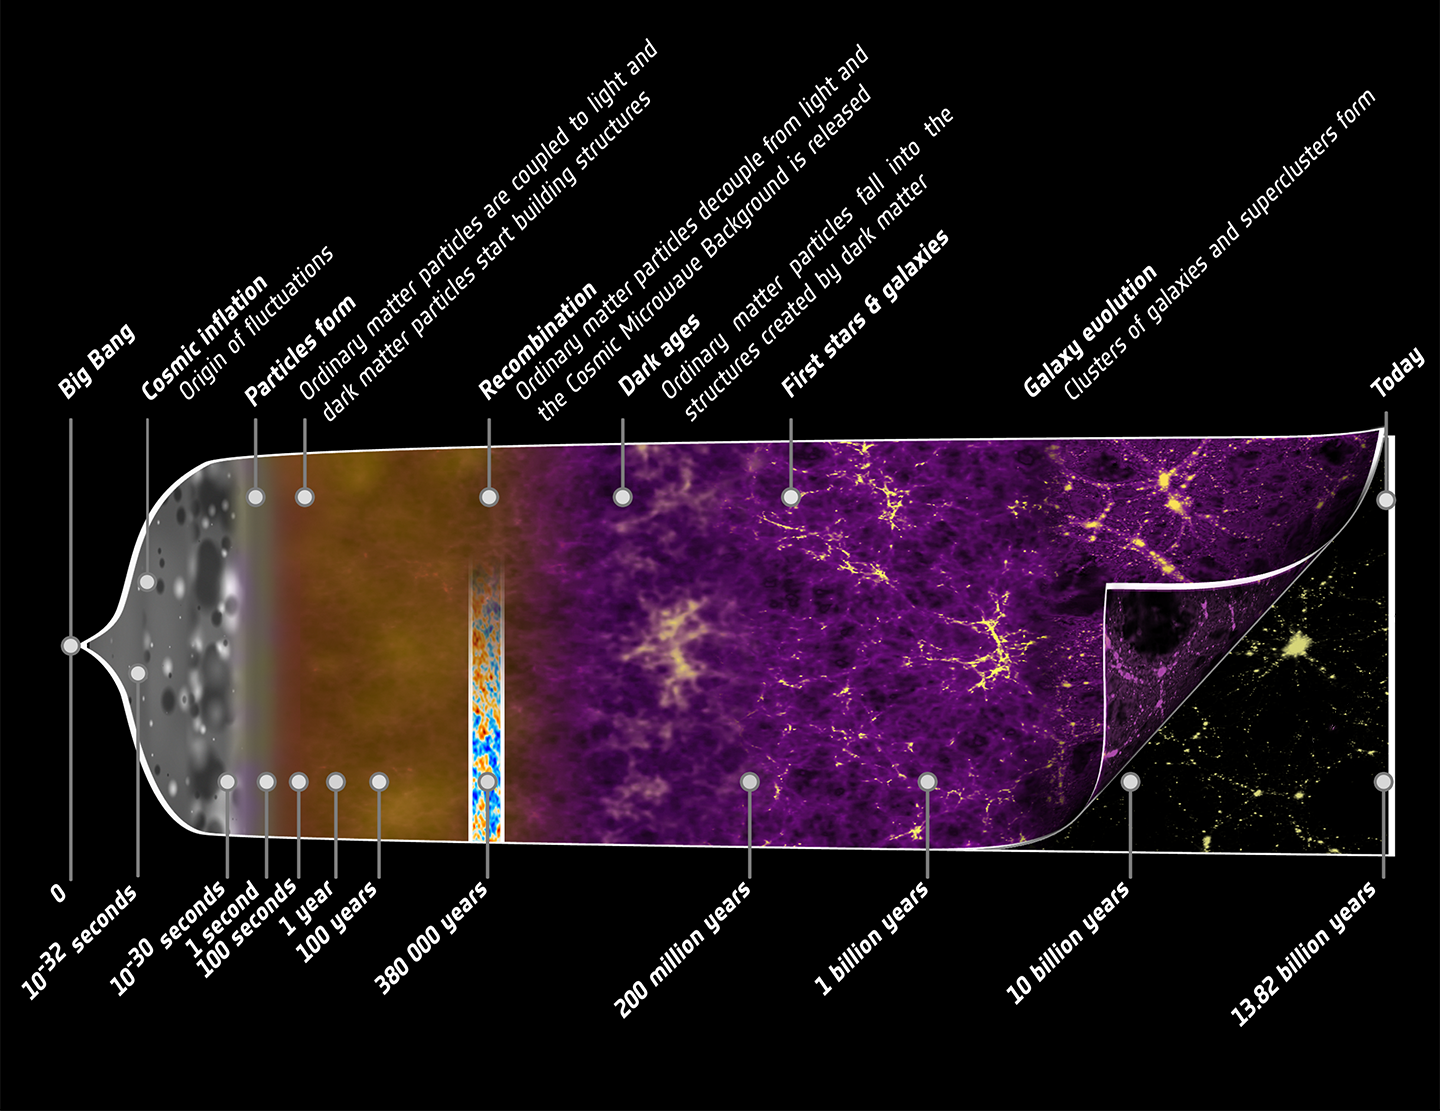 a timeline showing some of the major events in our universe from the Big Bang to today